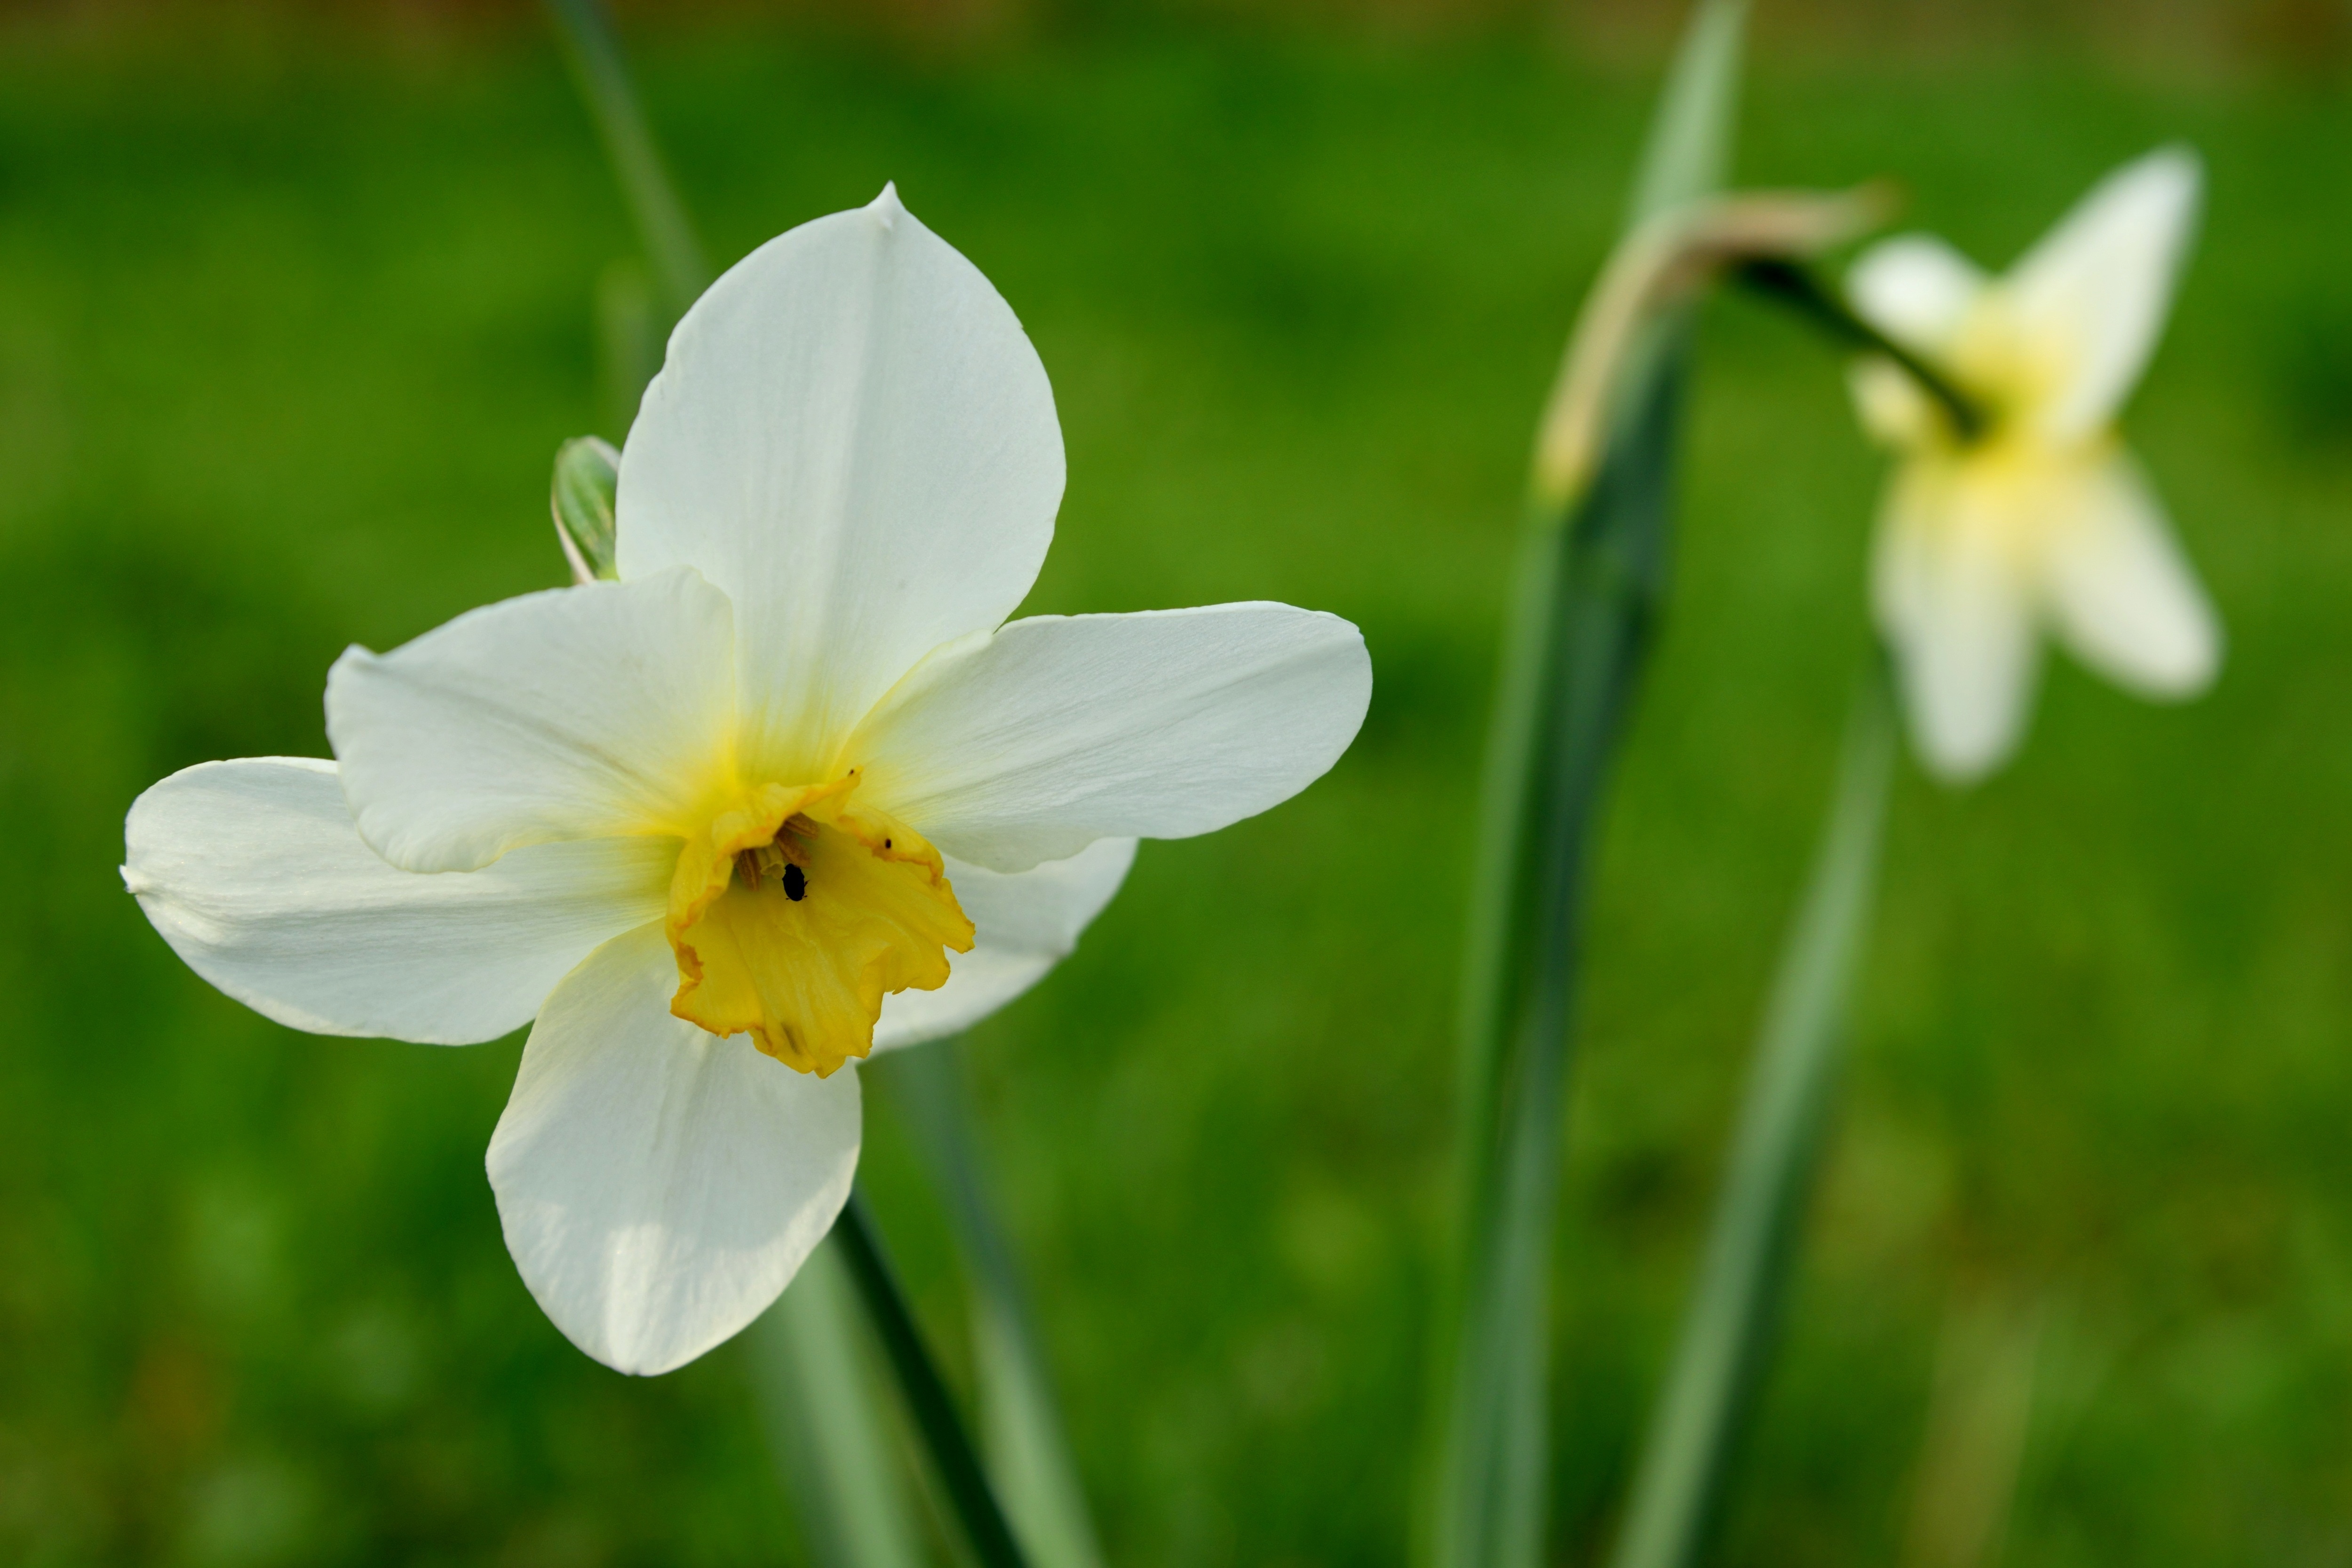 white and yellow daffodil flower